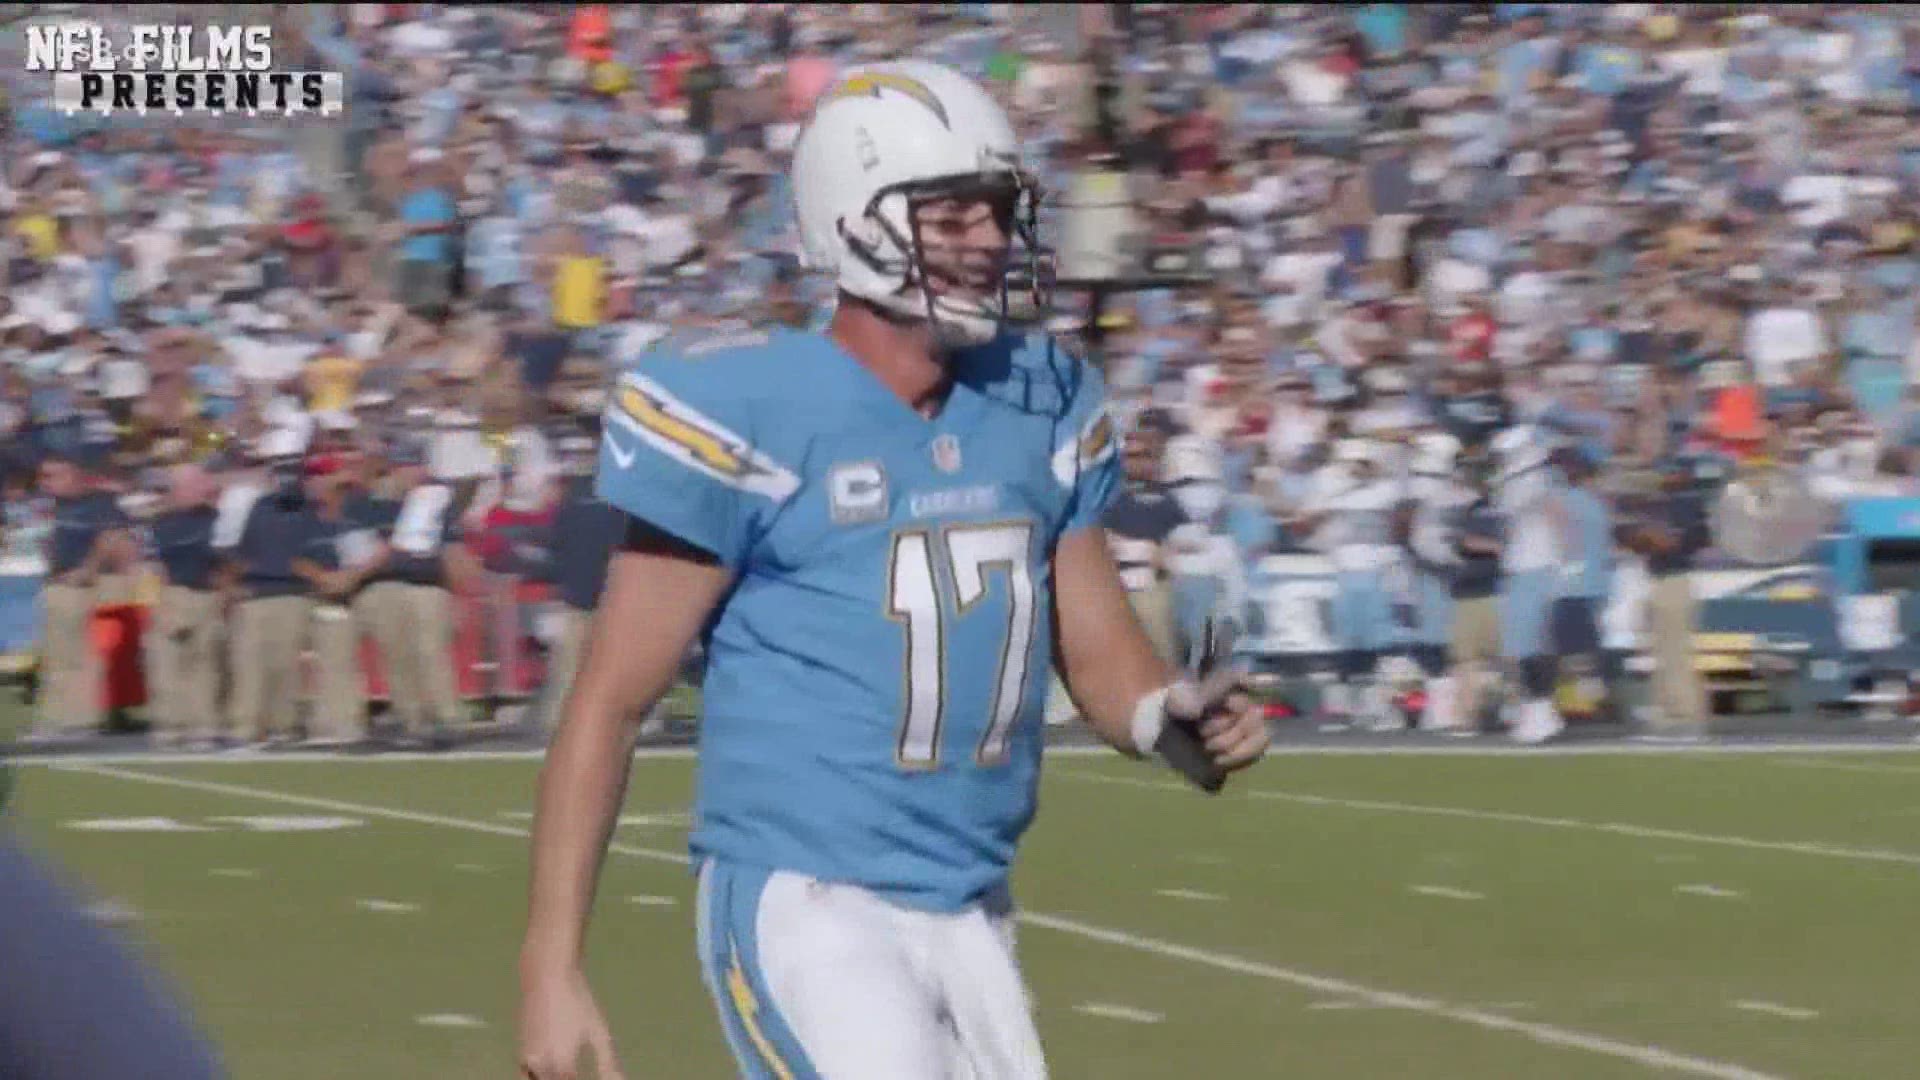 Other players throughout the league called him the king of trash talking. Check out these hilarious on field moments of Philip Rivers.